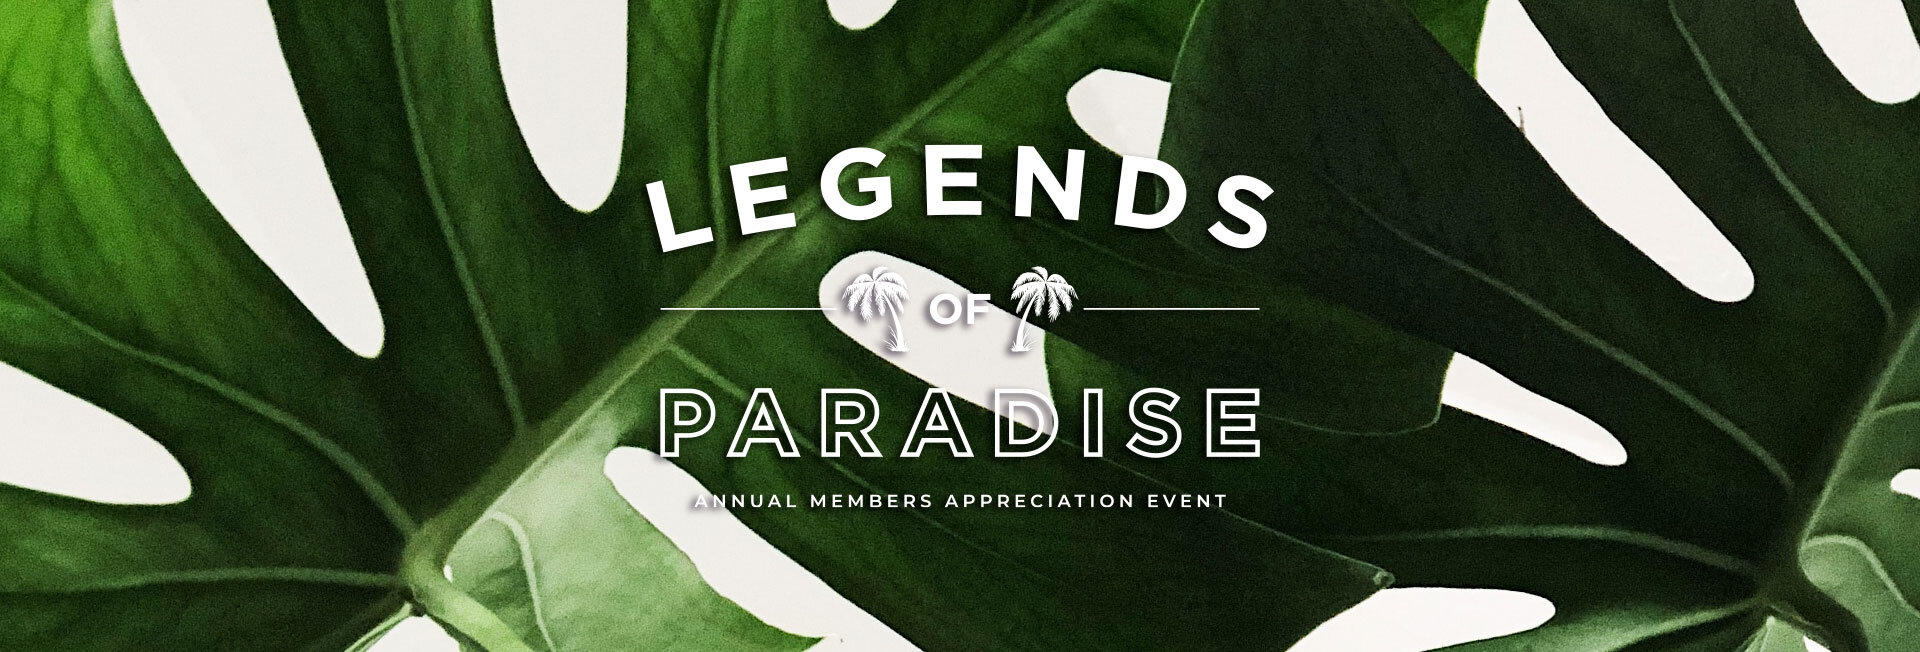 tropical leaf background with text legends of paradise annual members appreciation event